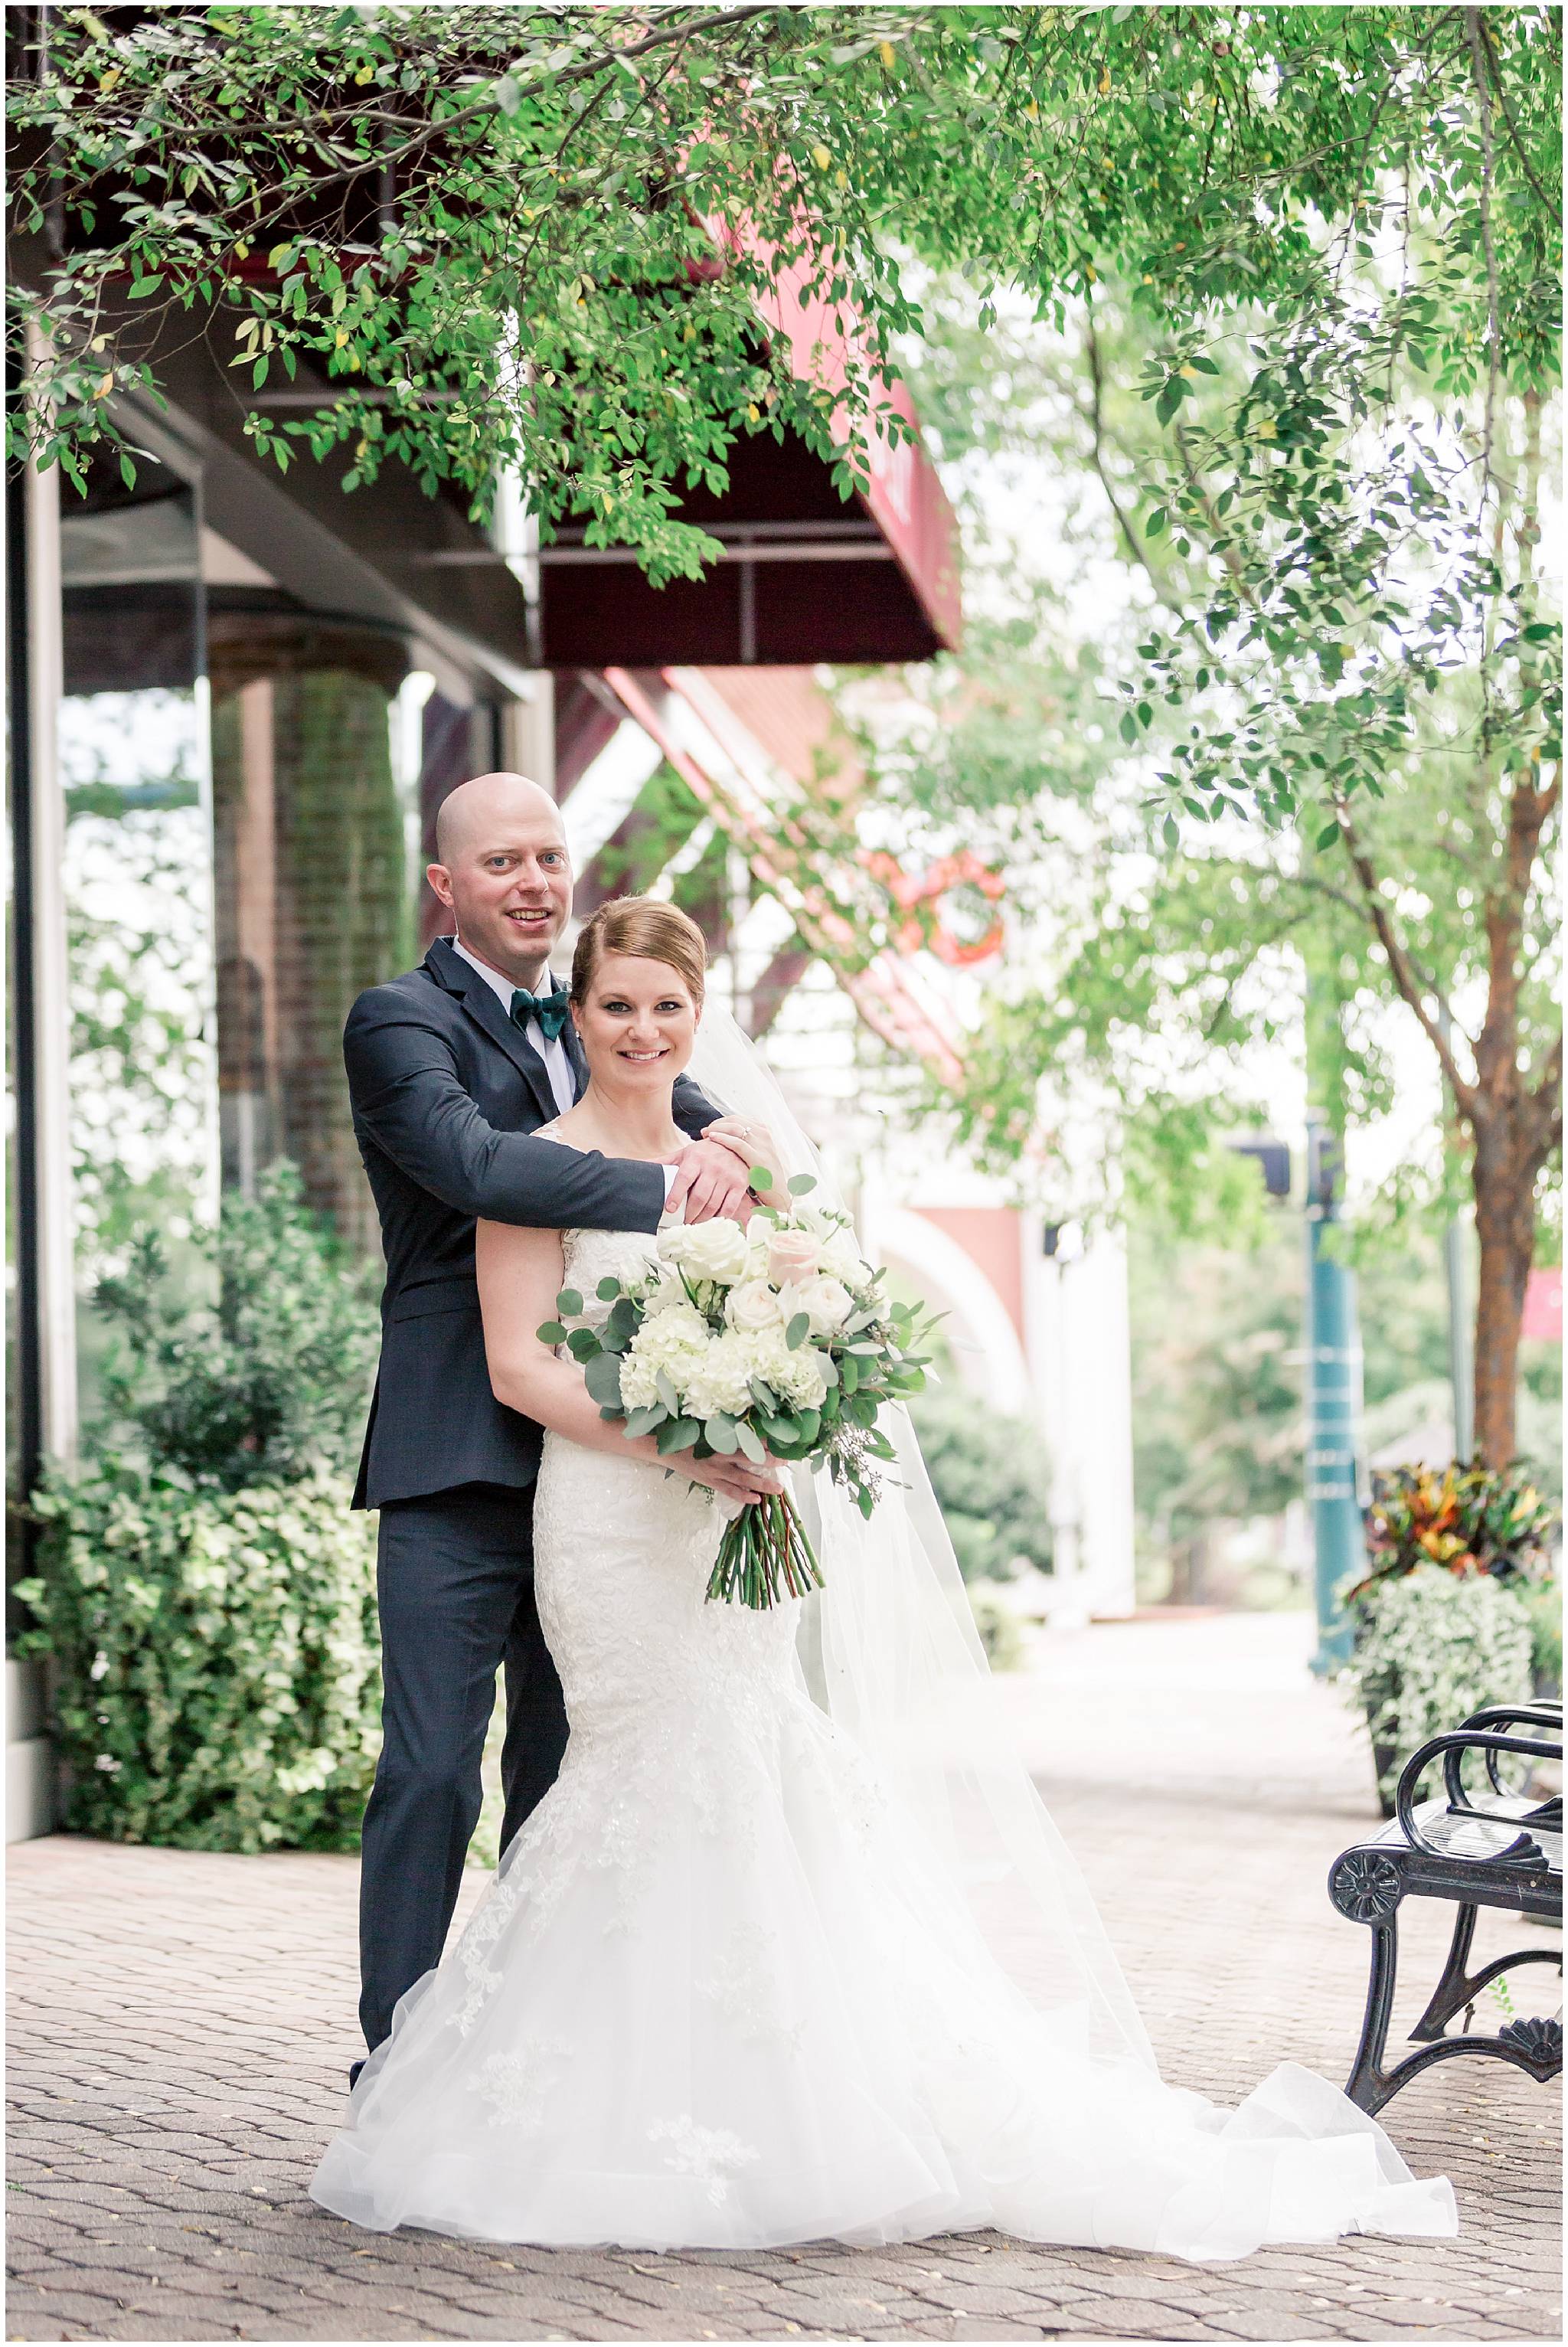 who are the best wedding photographers in north georgia ga